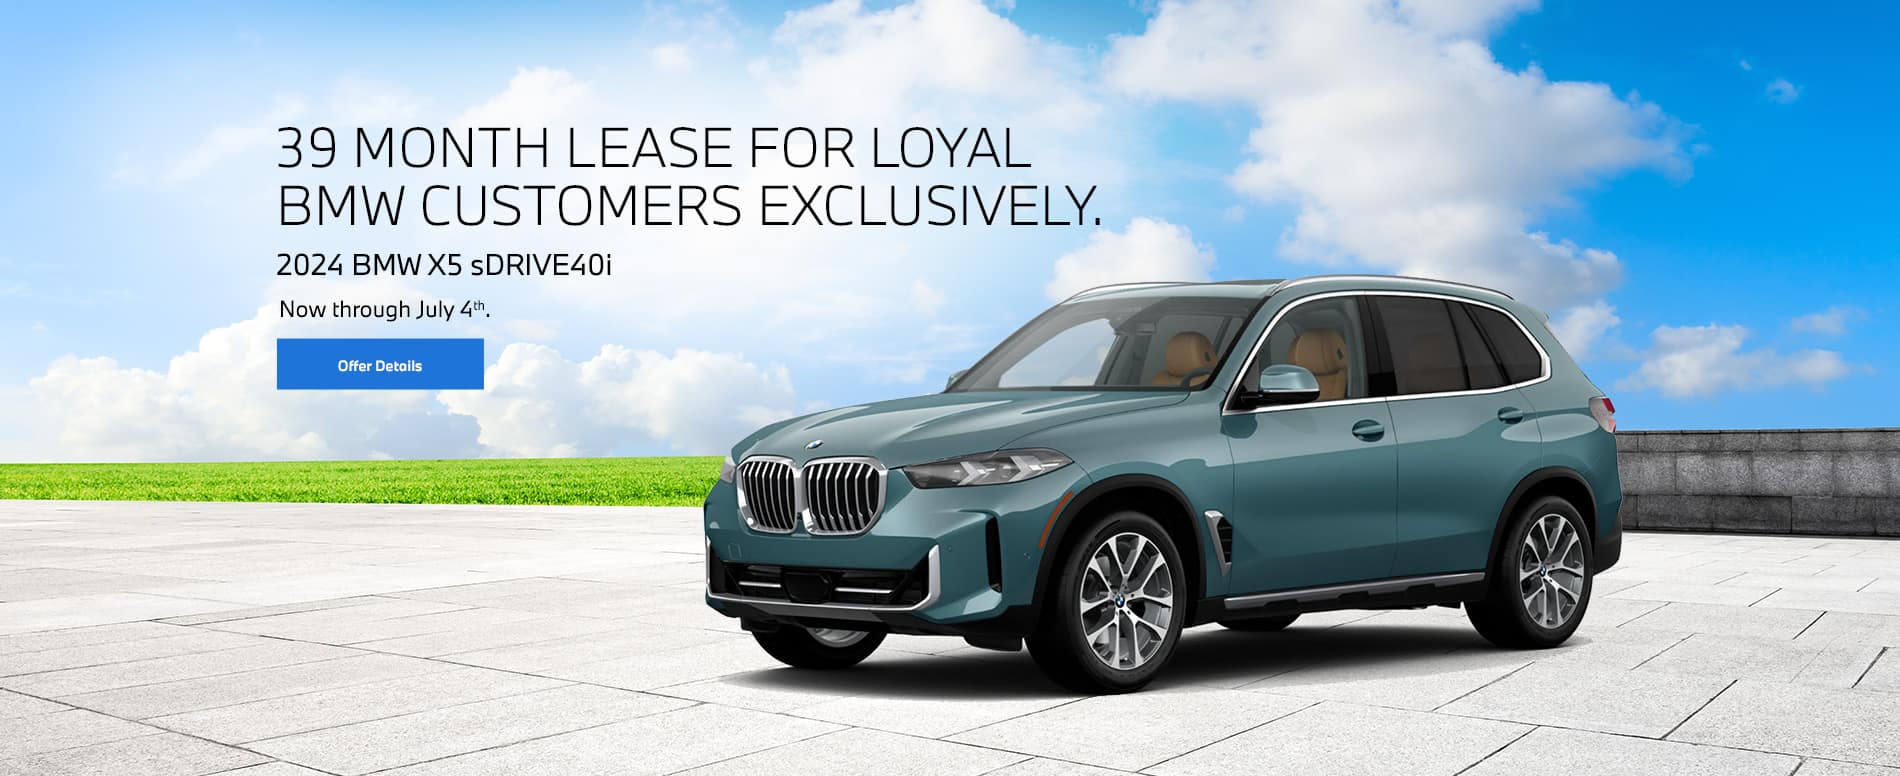 39 month lease for loyal BMW customers exclusively